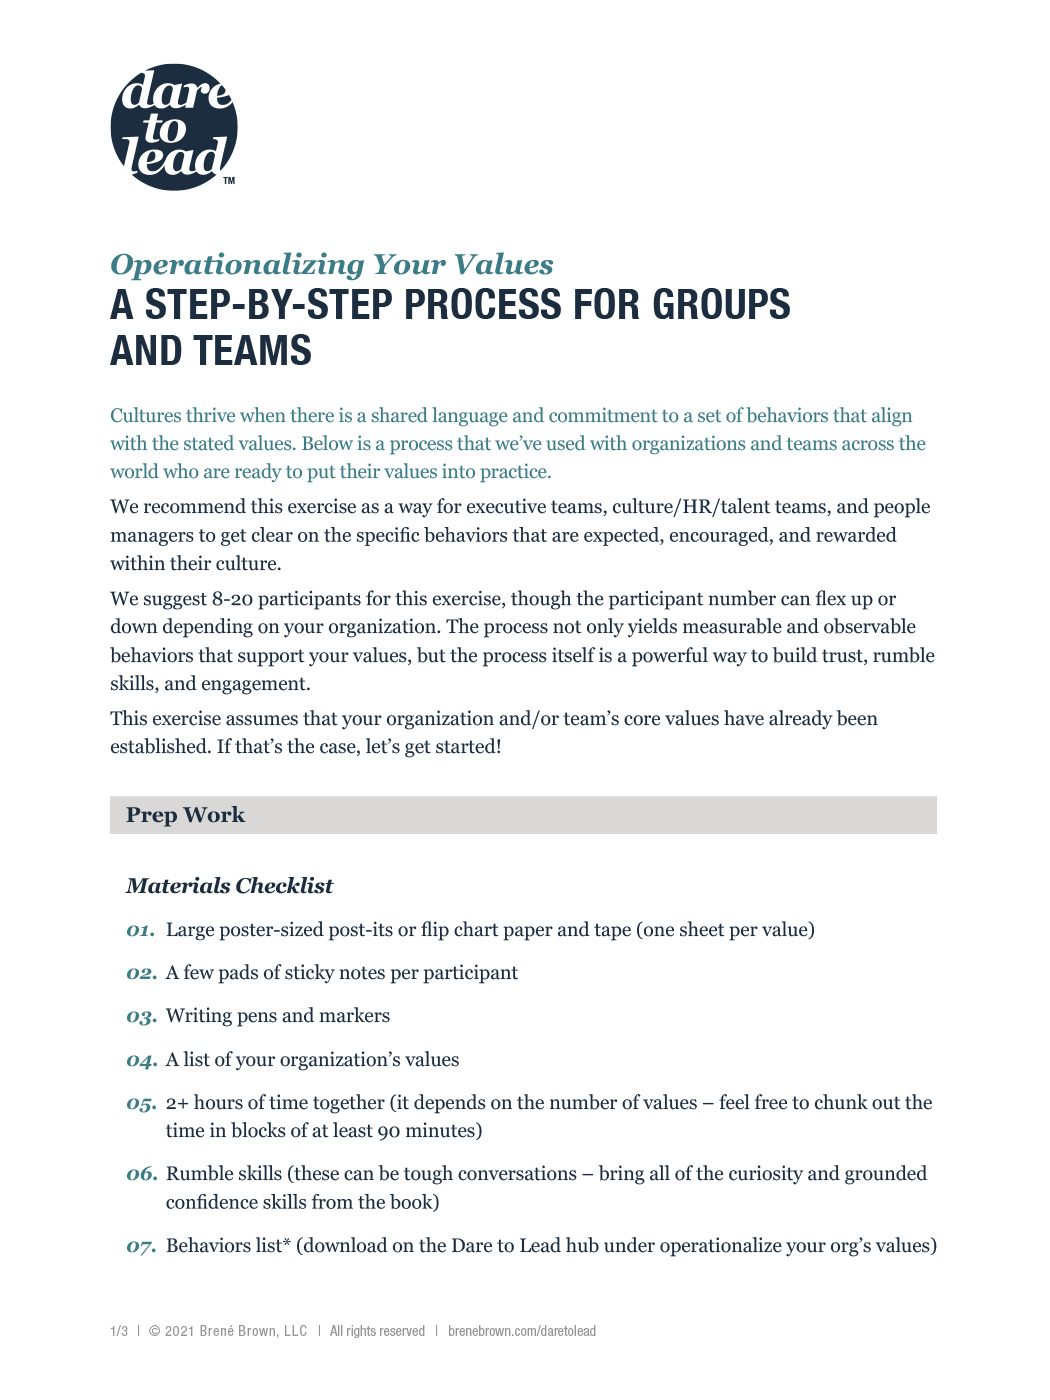 Dare to Lead Operationalizing Your Values: A Step-by-Step Process for Groups and Teams